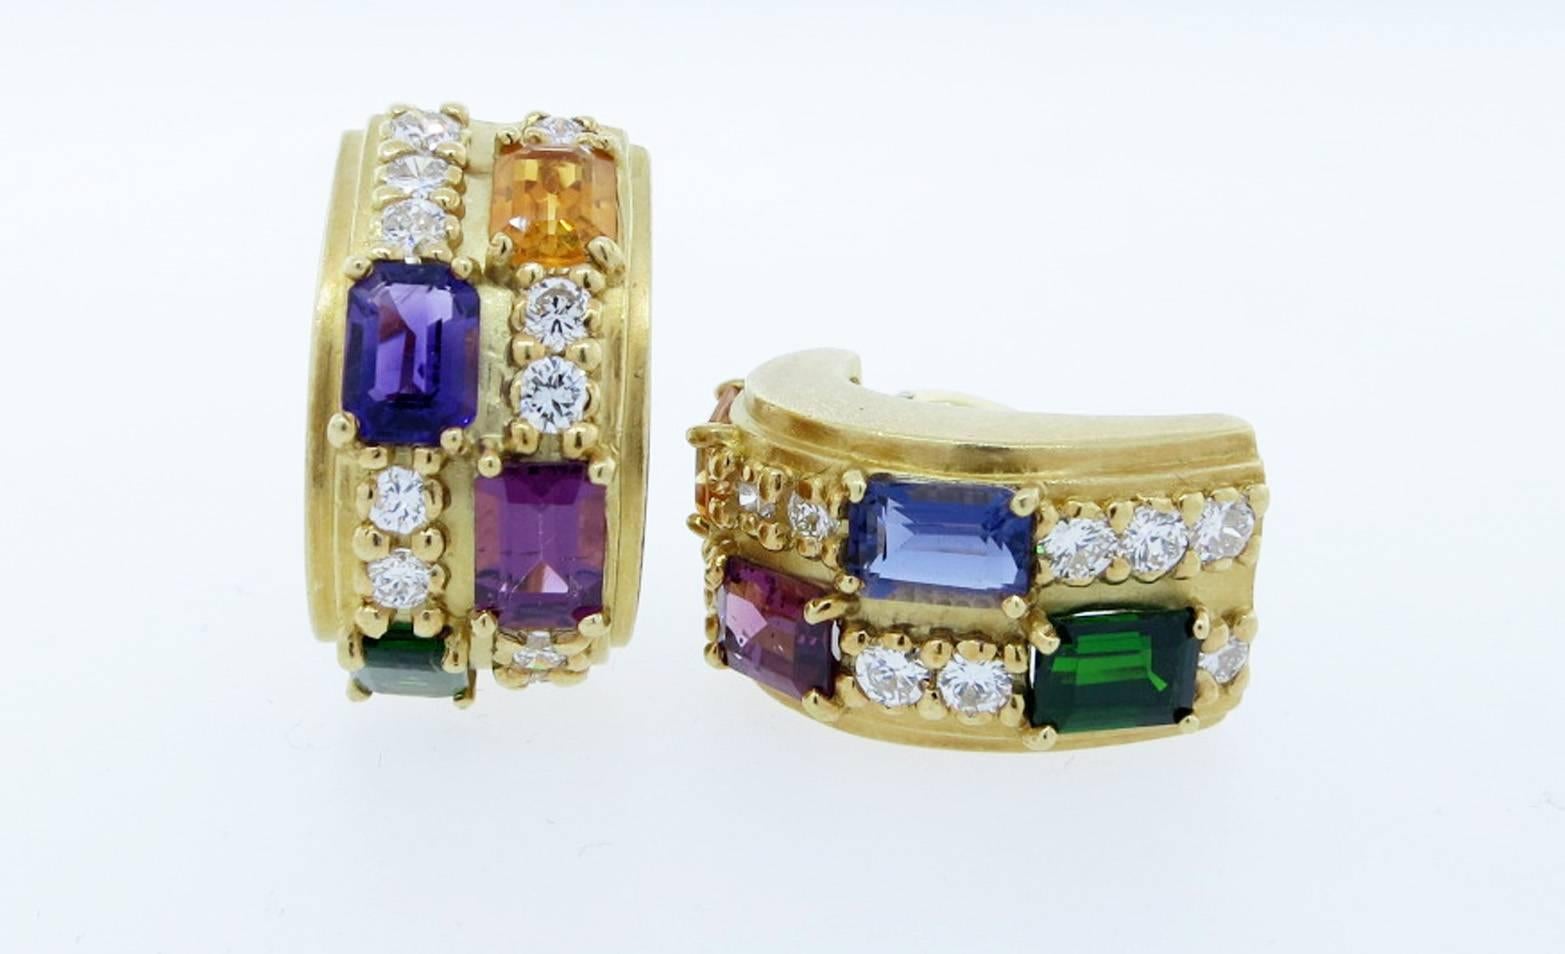 Handsome 18kt. yellow gold clip and post back earrings. Each half  hoop earring measures 1 inch in length and is set with an emerald cut citrine, iolite, pink tourmaline and green tourmaline measuring 7. mm. x 5.mm. Each are also prong set with